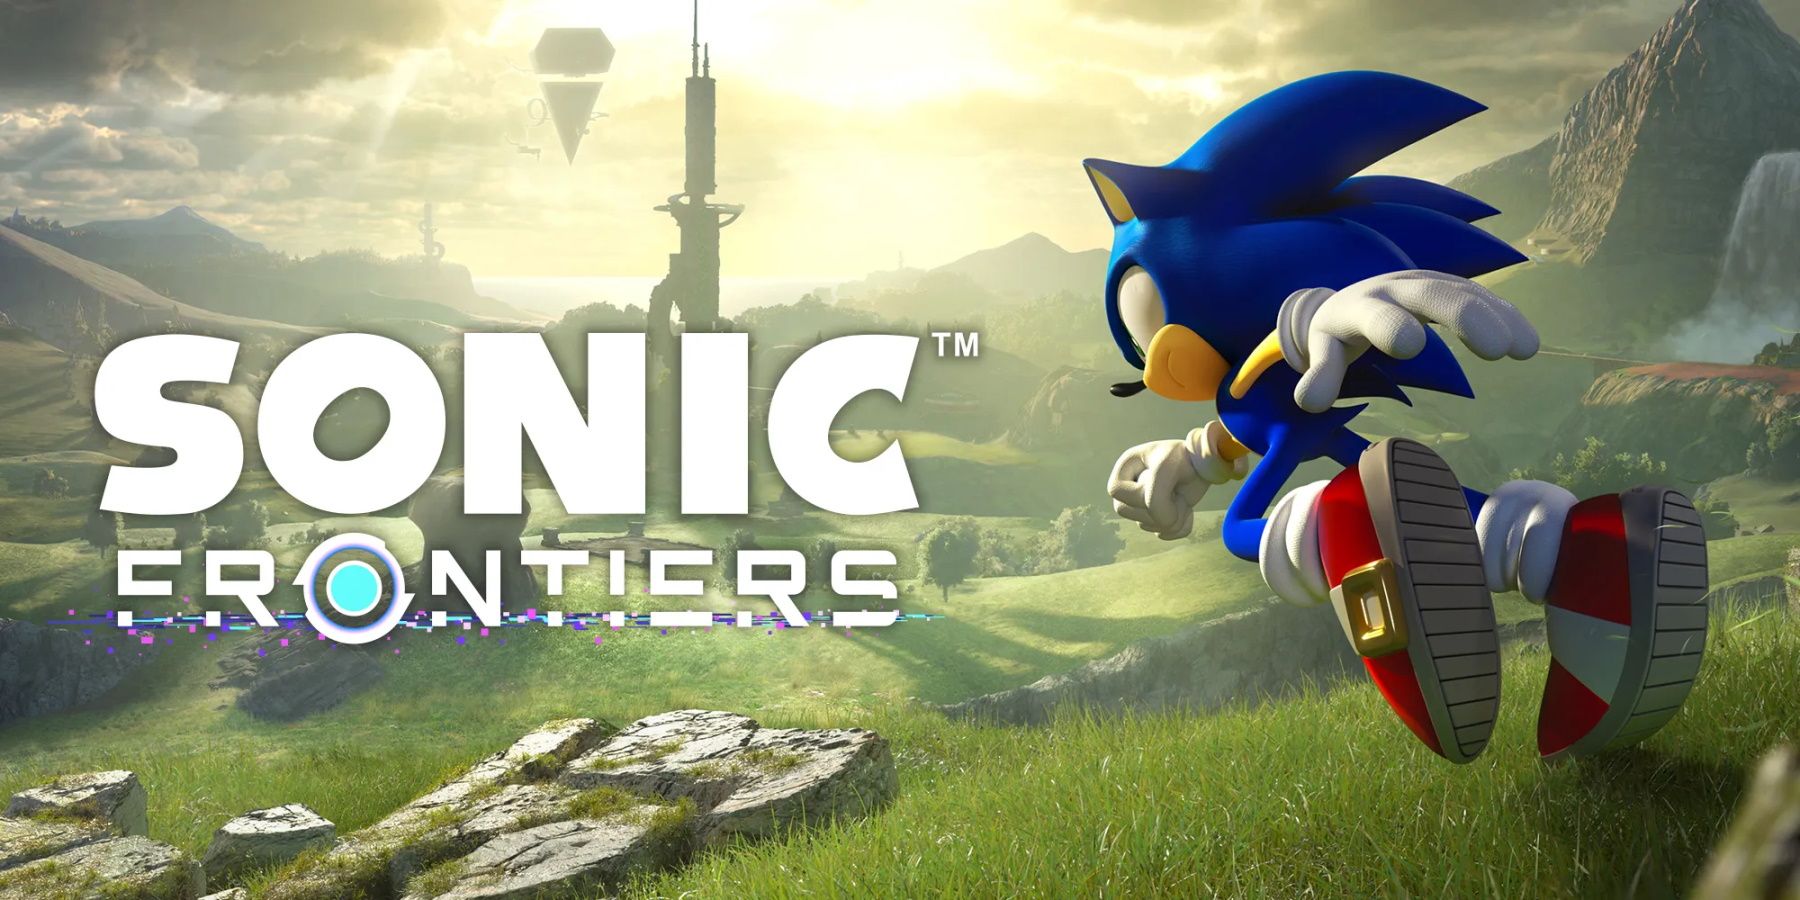 sonic frontiers game trailer